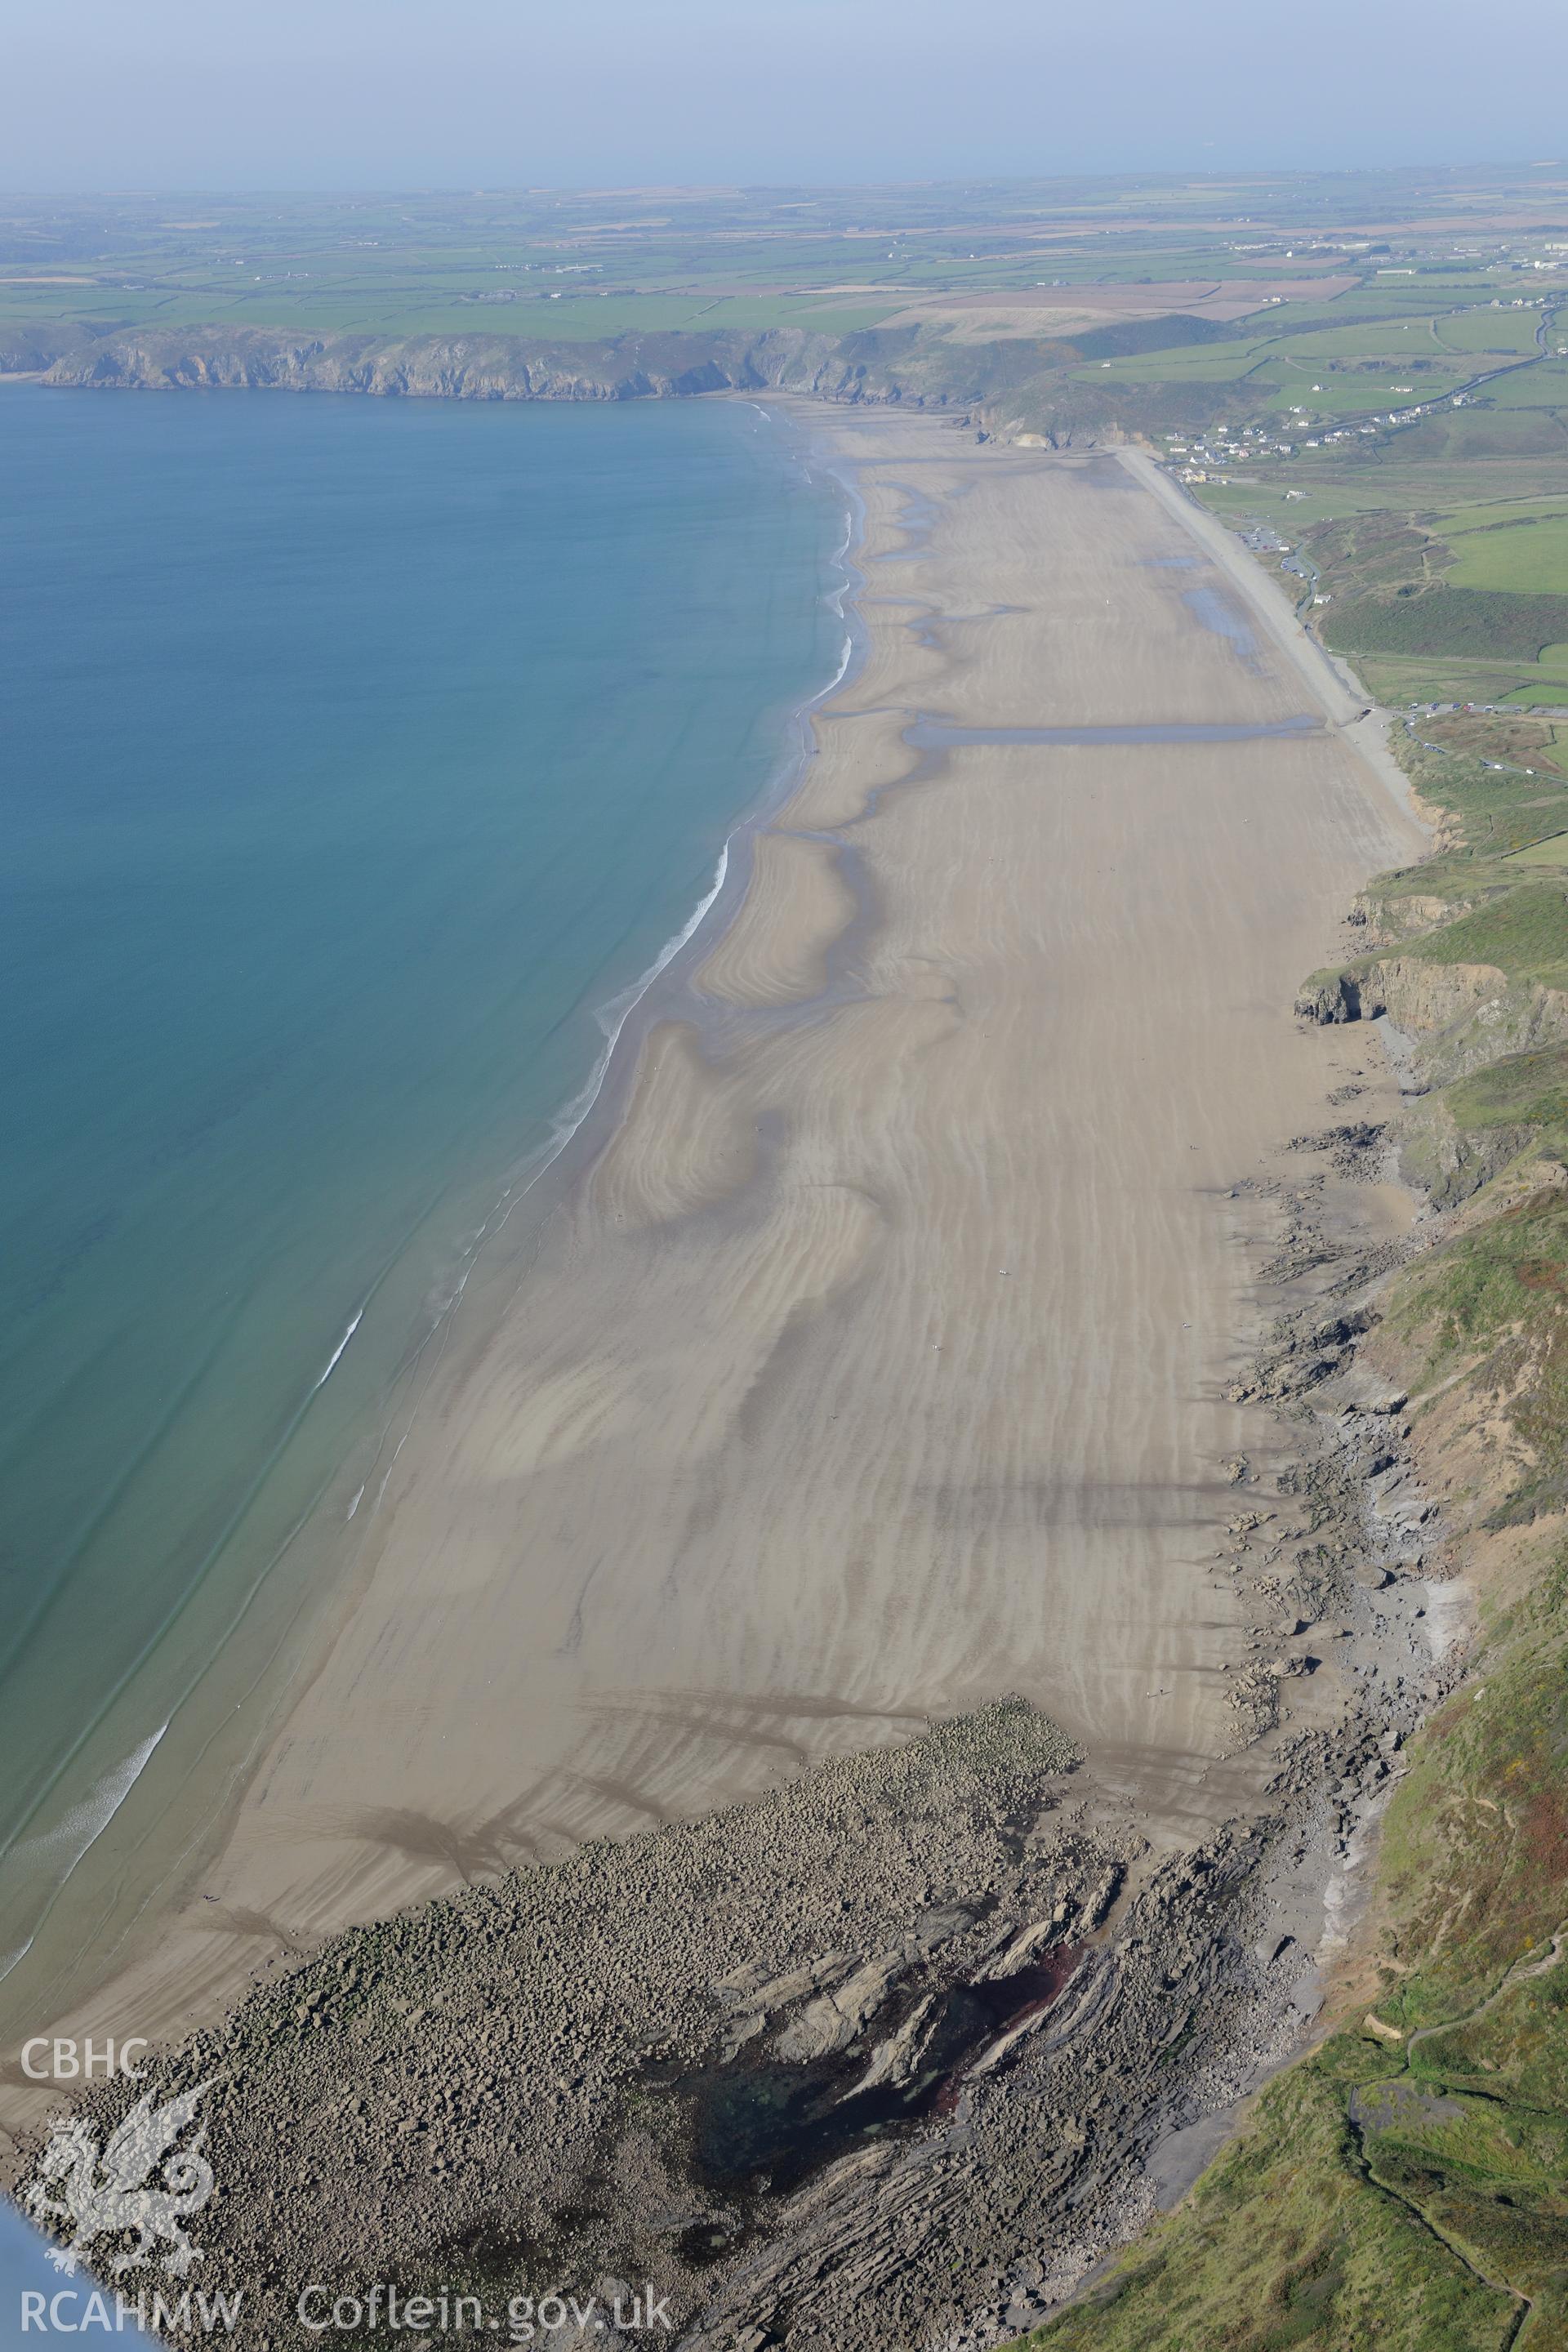 Newgale village and Newgale sands, north west of Haverford West. Oblique aerial photograph taken during the Royal Commission's programme of archaeological aerial reconnaissance by Toby Driver on 30th September 2015.